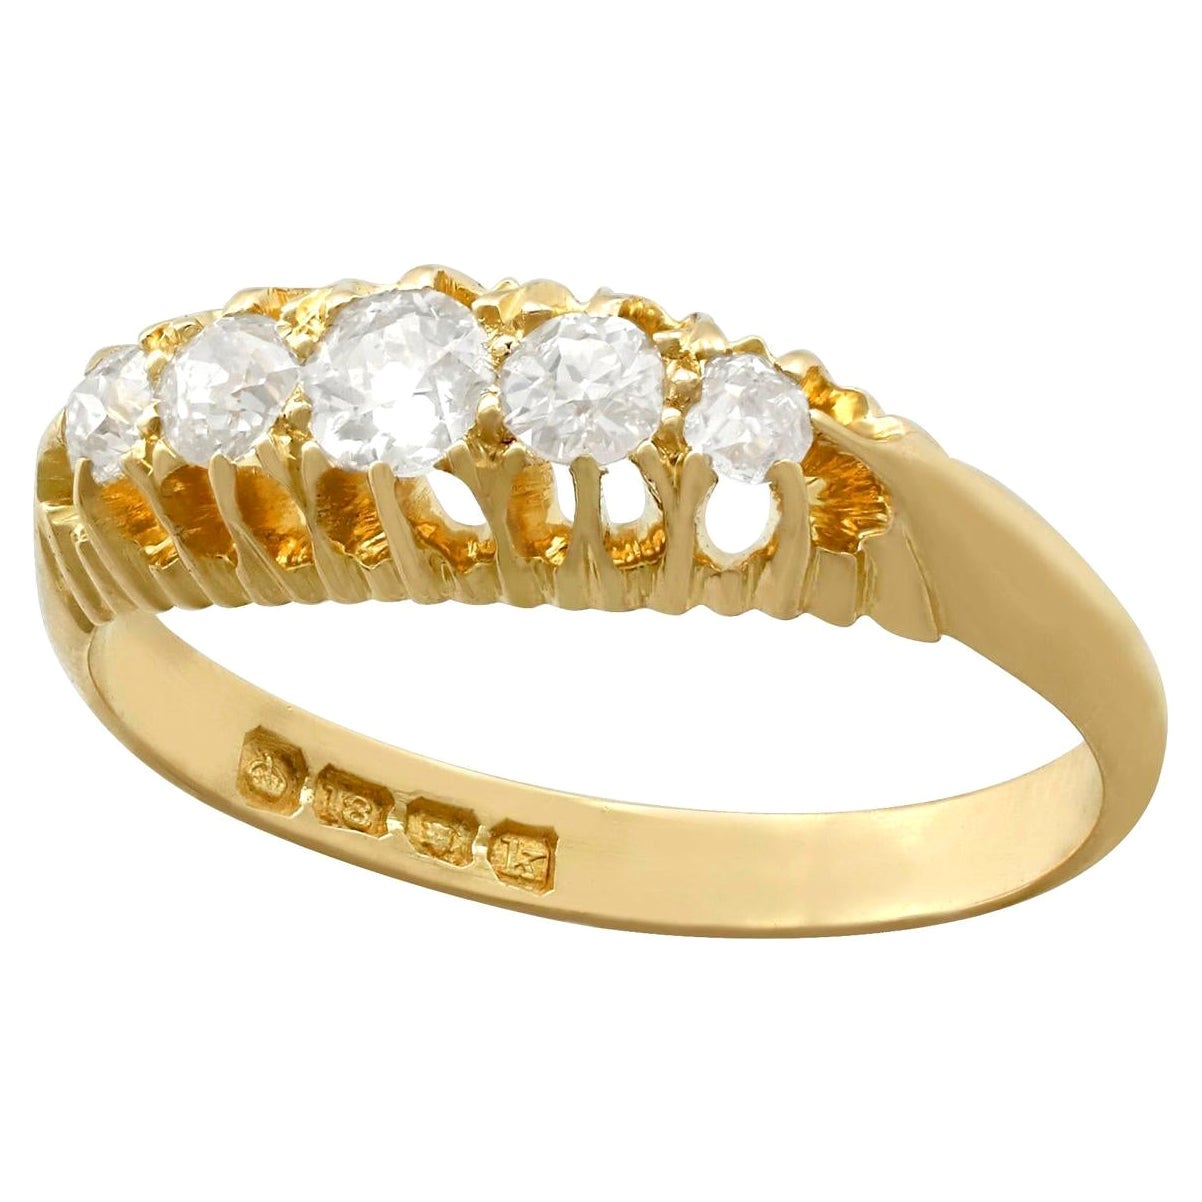 Antique 1905 Diamond and Yellow Gold Five-Stone Cocktail Ring